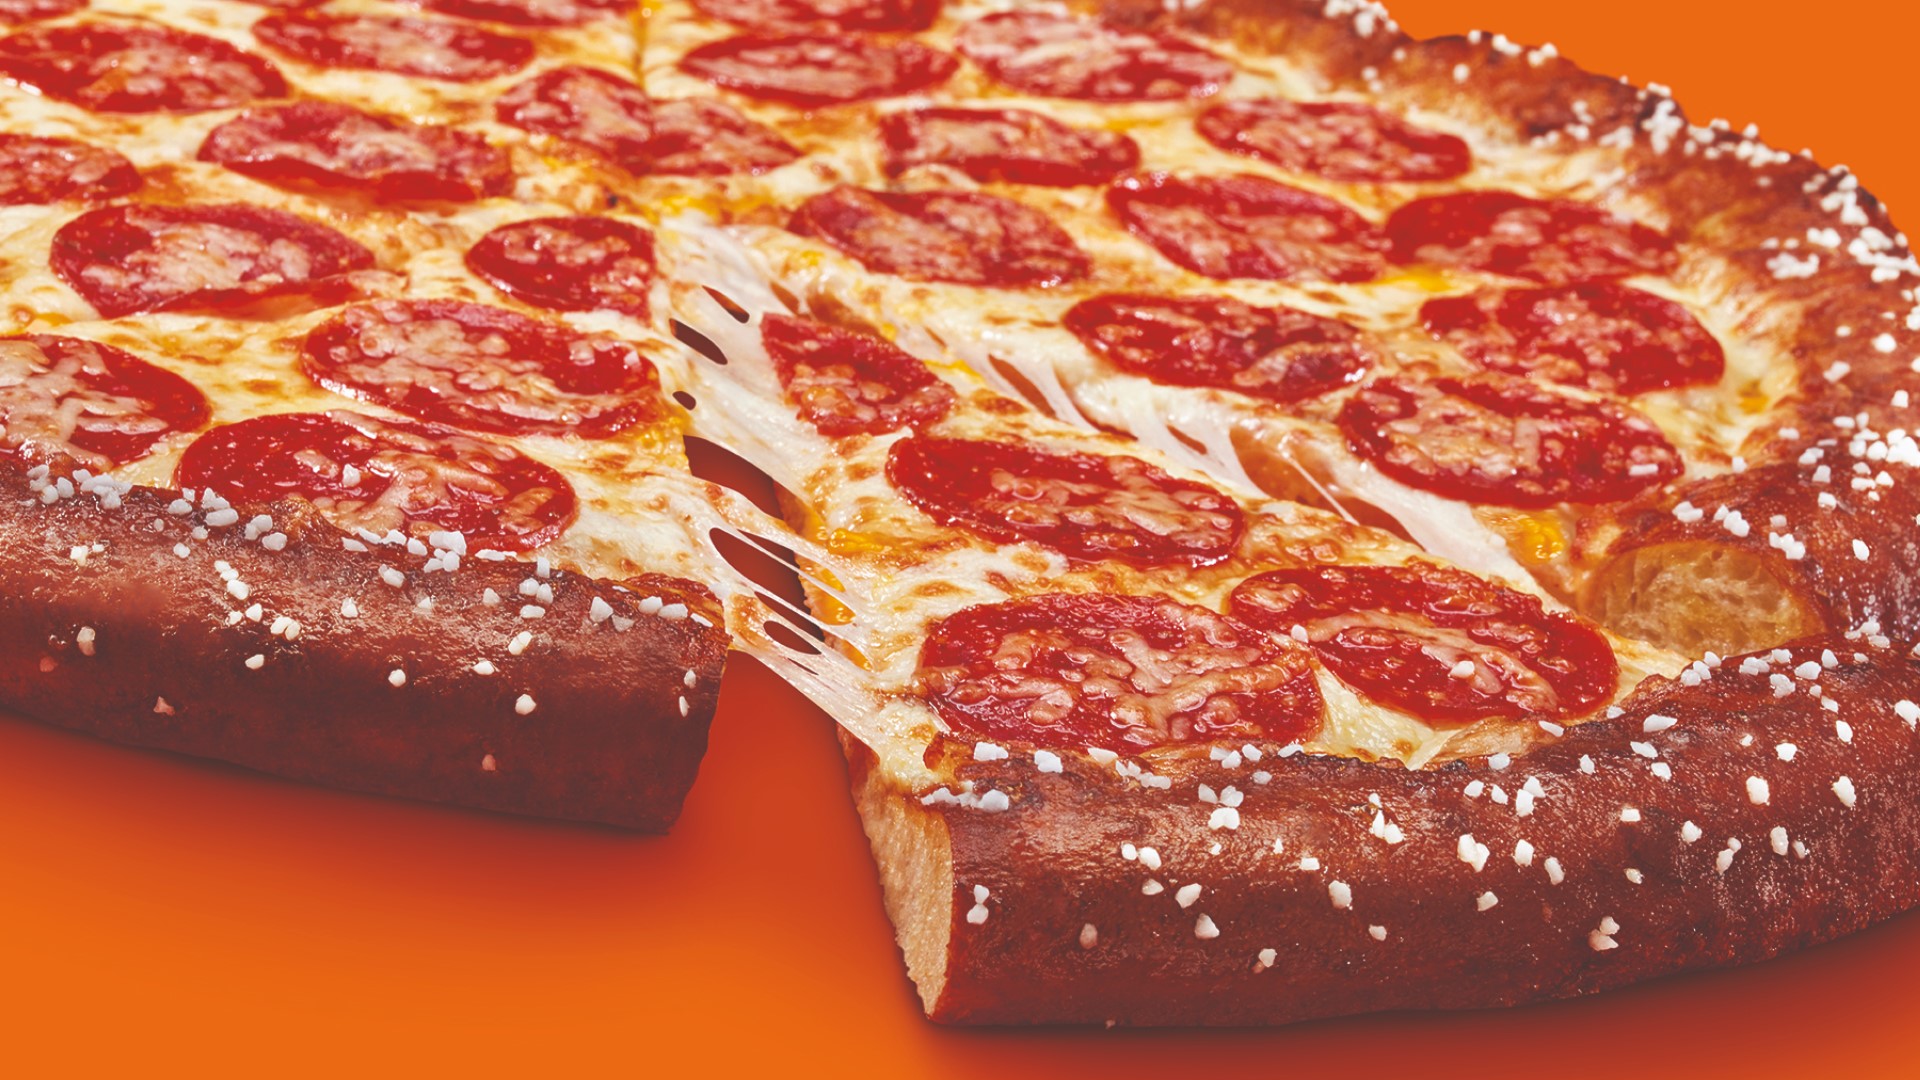 Little Caesars is asking customers not to download a coupon that claims free pizzas because it contains a virus. Plus more stories to know before you go.